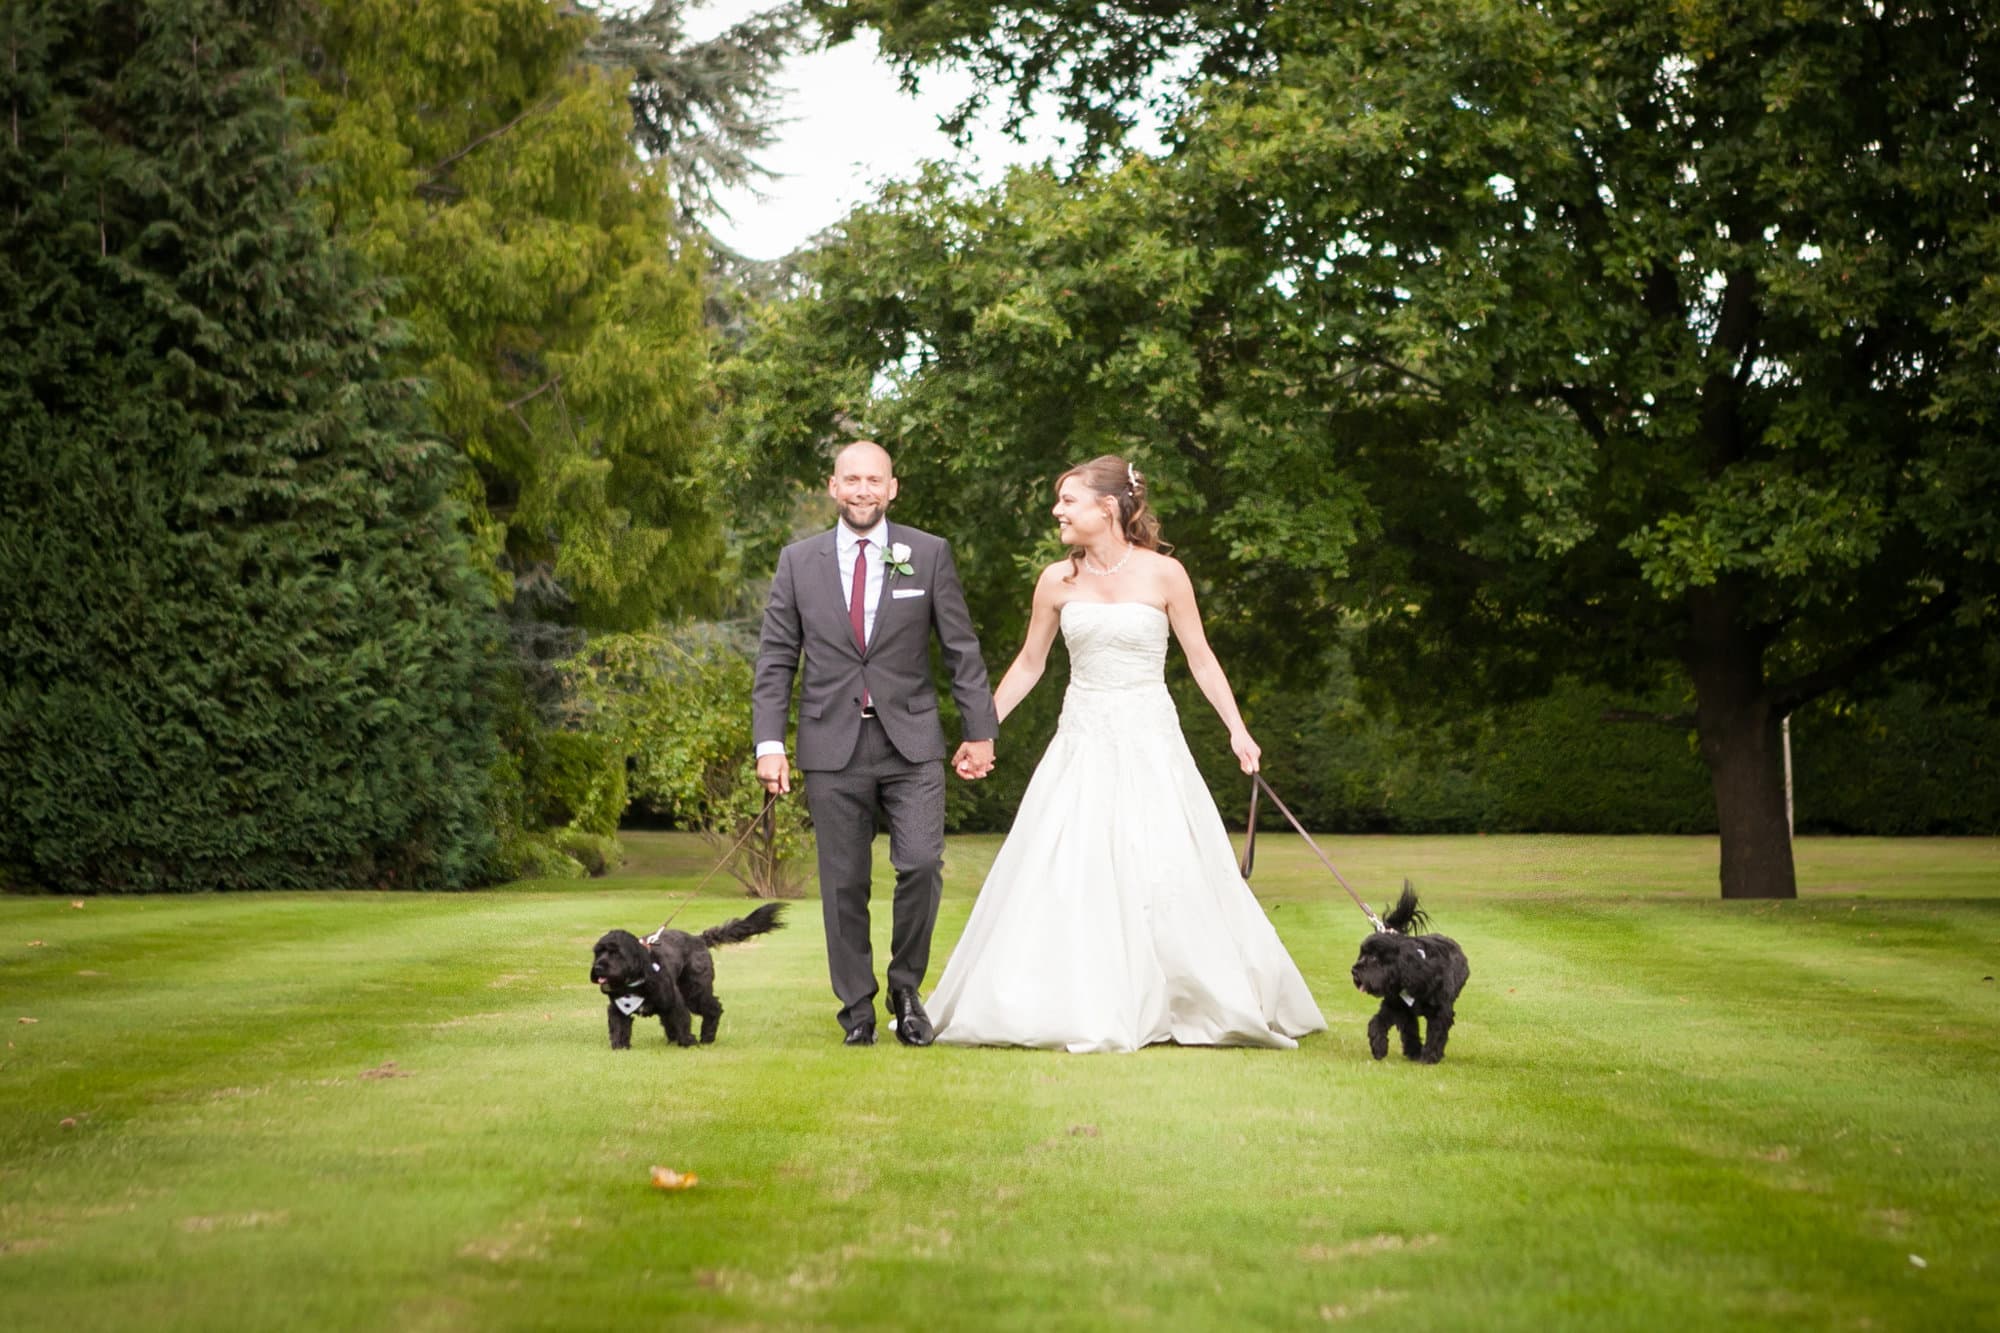 Wedding photo with dogs at at Oaks Farm Weddings taken by Bromley Wedding Photographer